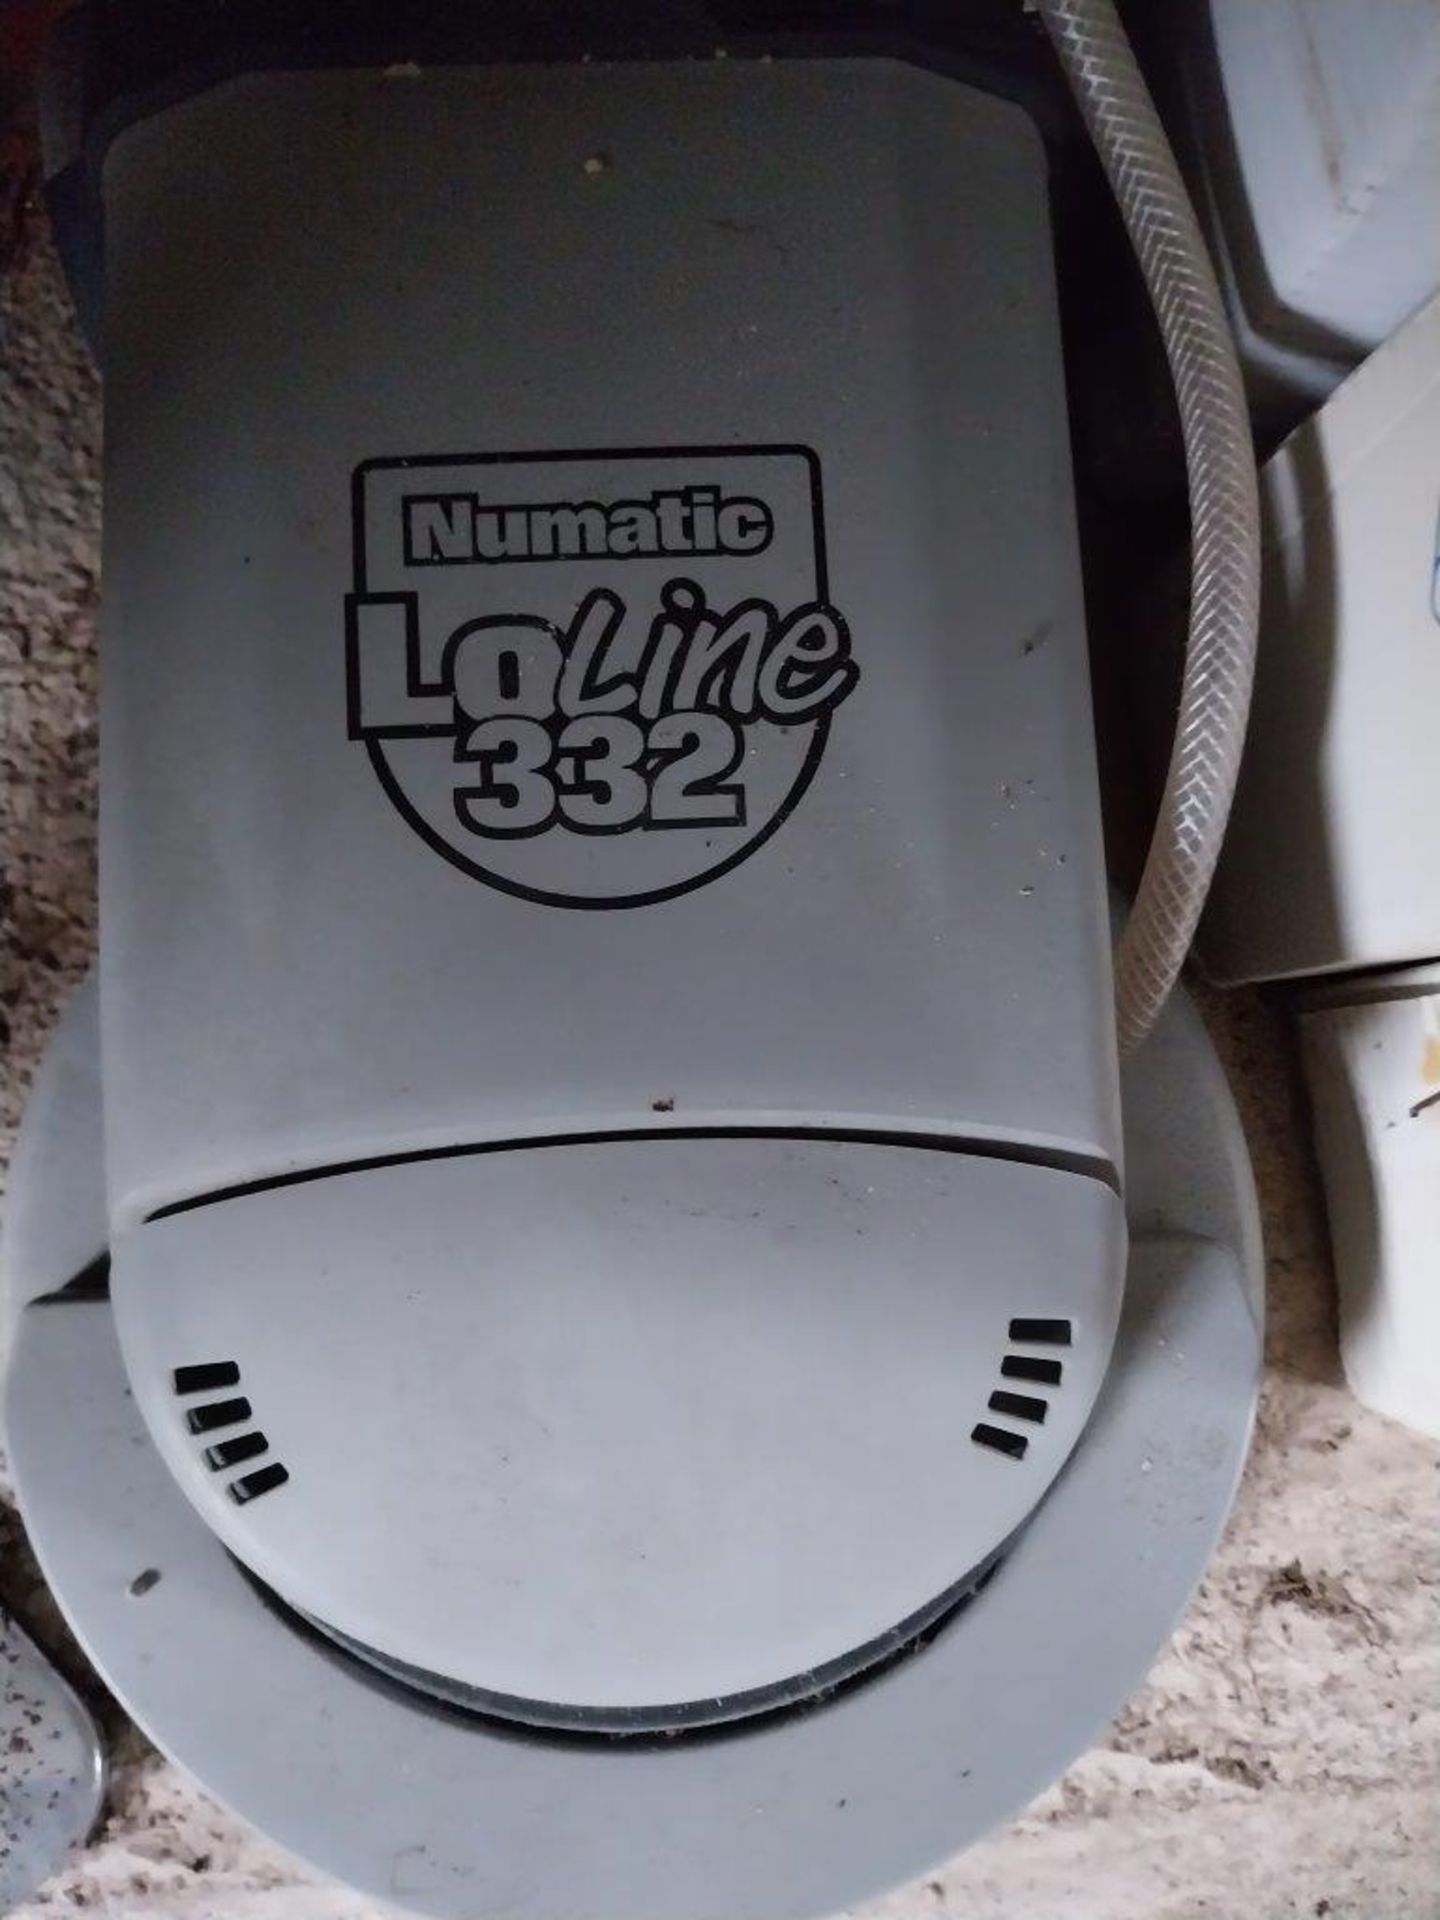 Numatic Loline 332 Floor Polisher with Quantity of Pads - Image 2 of 3